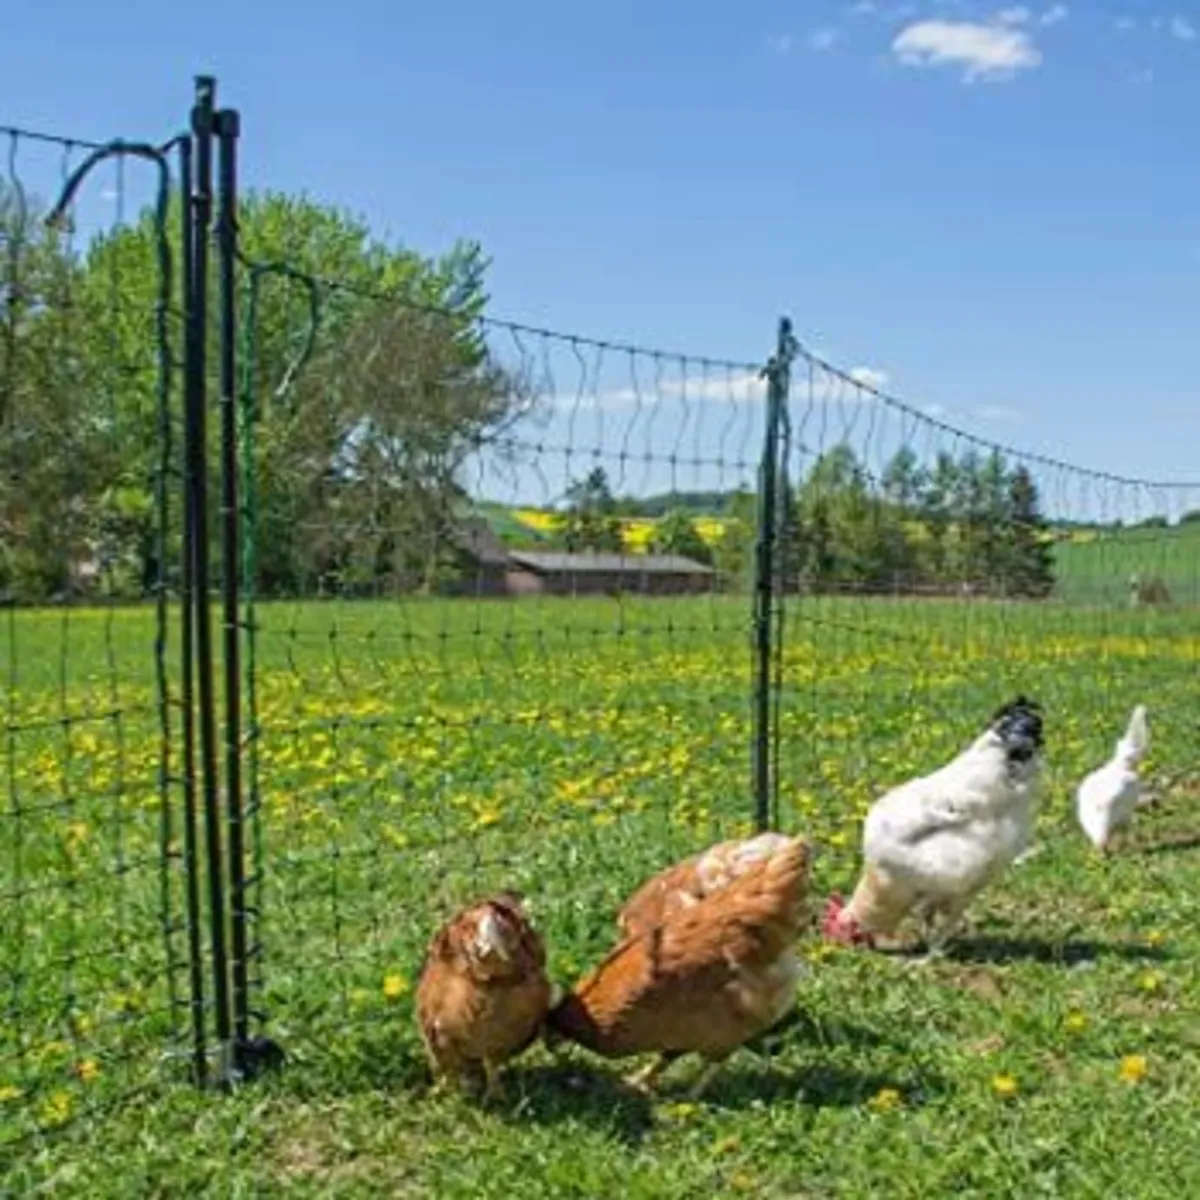 New Electric Poultry Fencing / Netting for Sale - Image 1